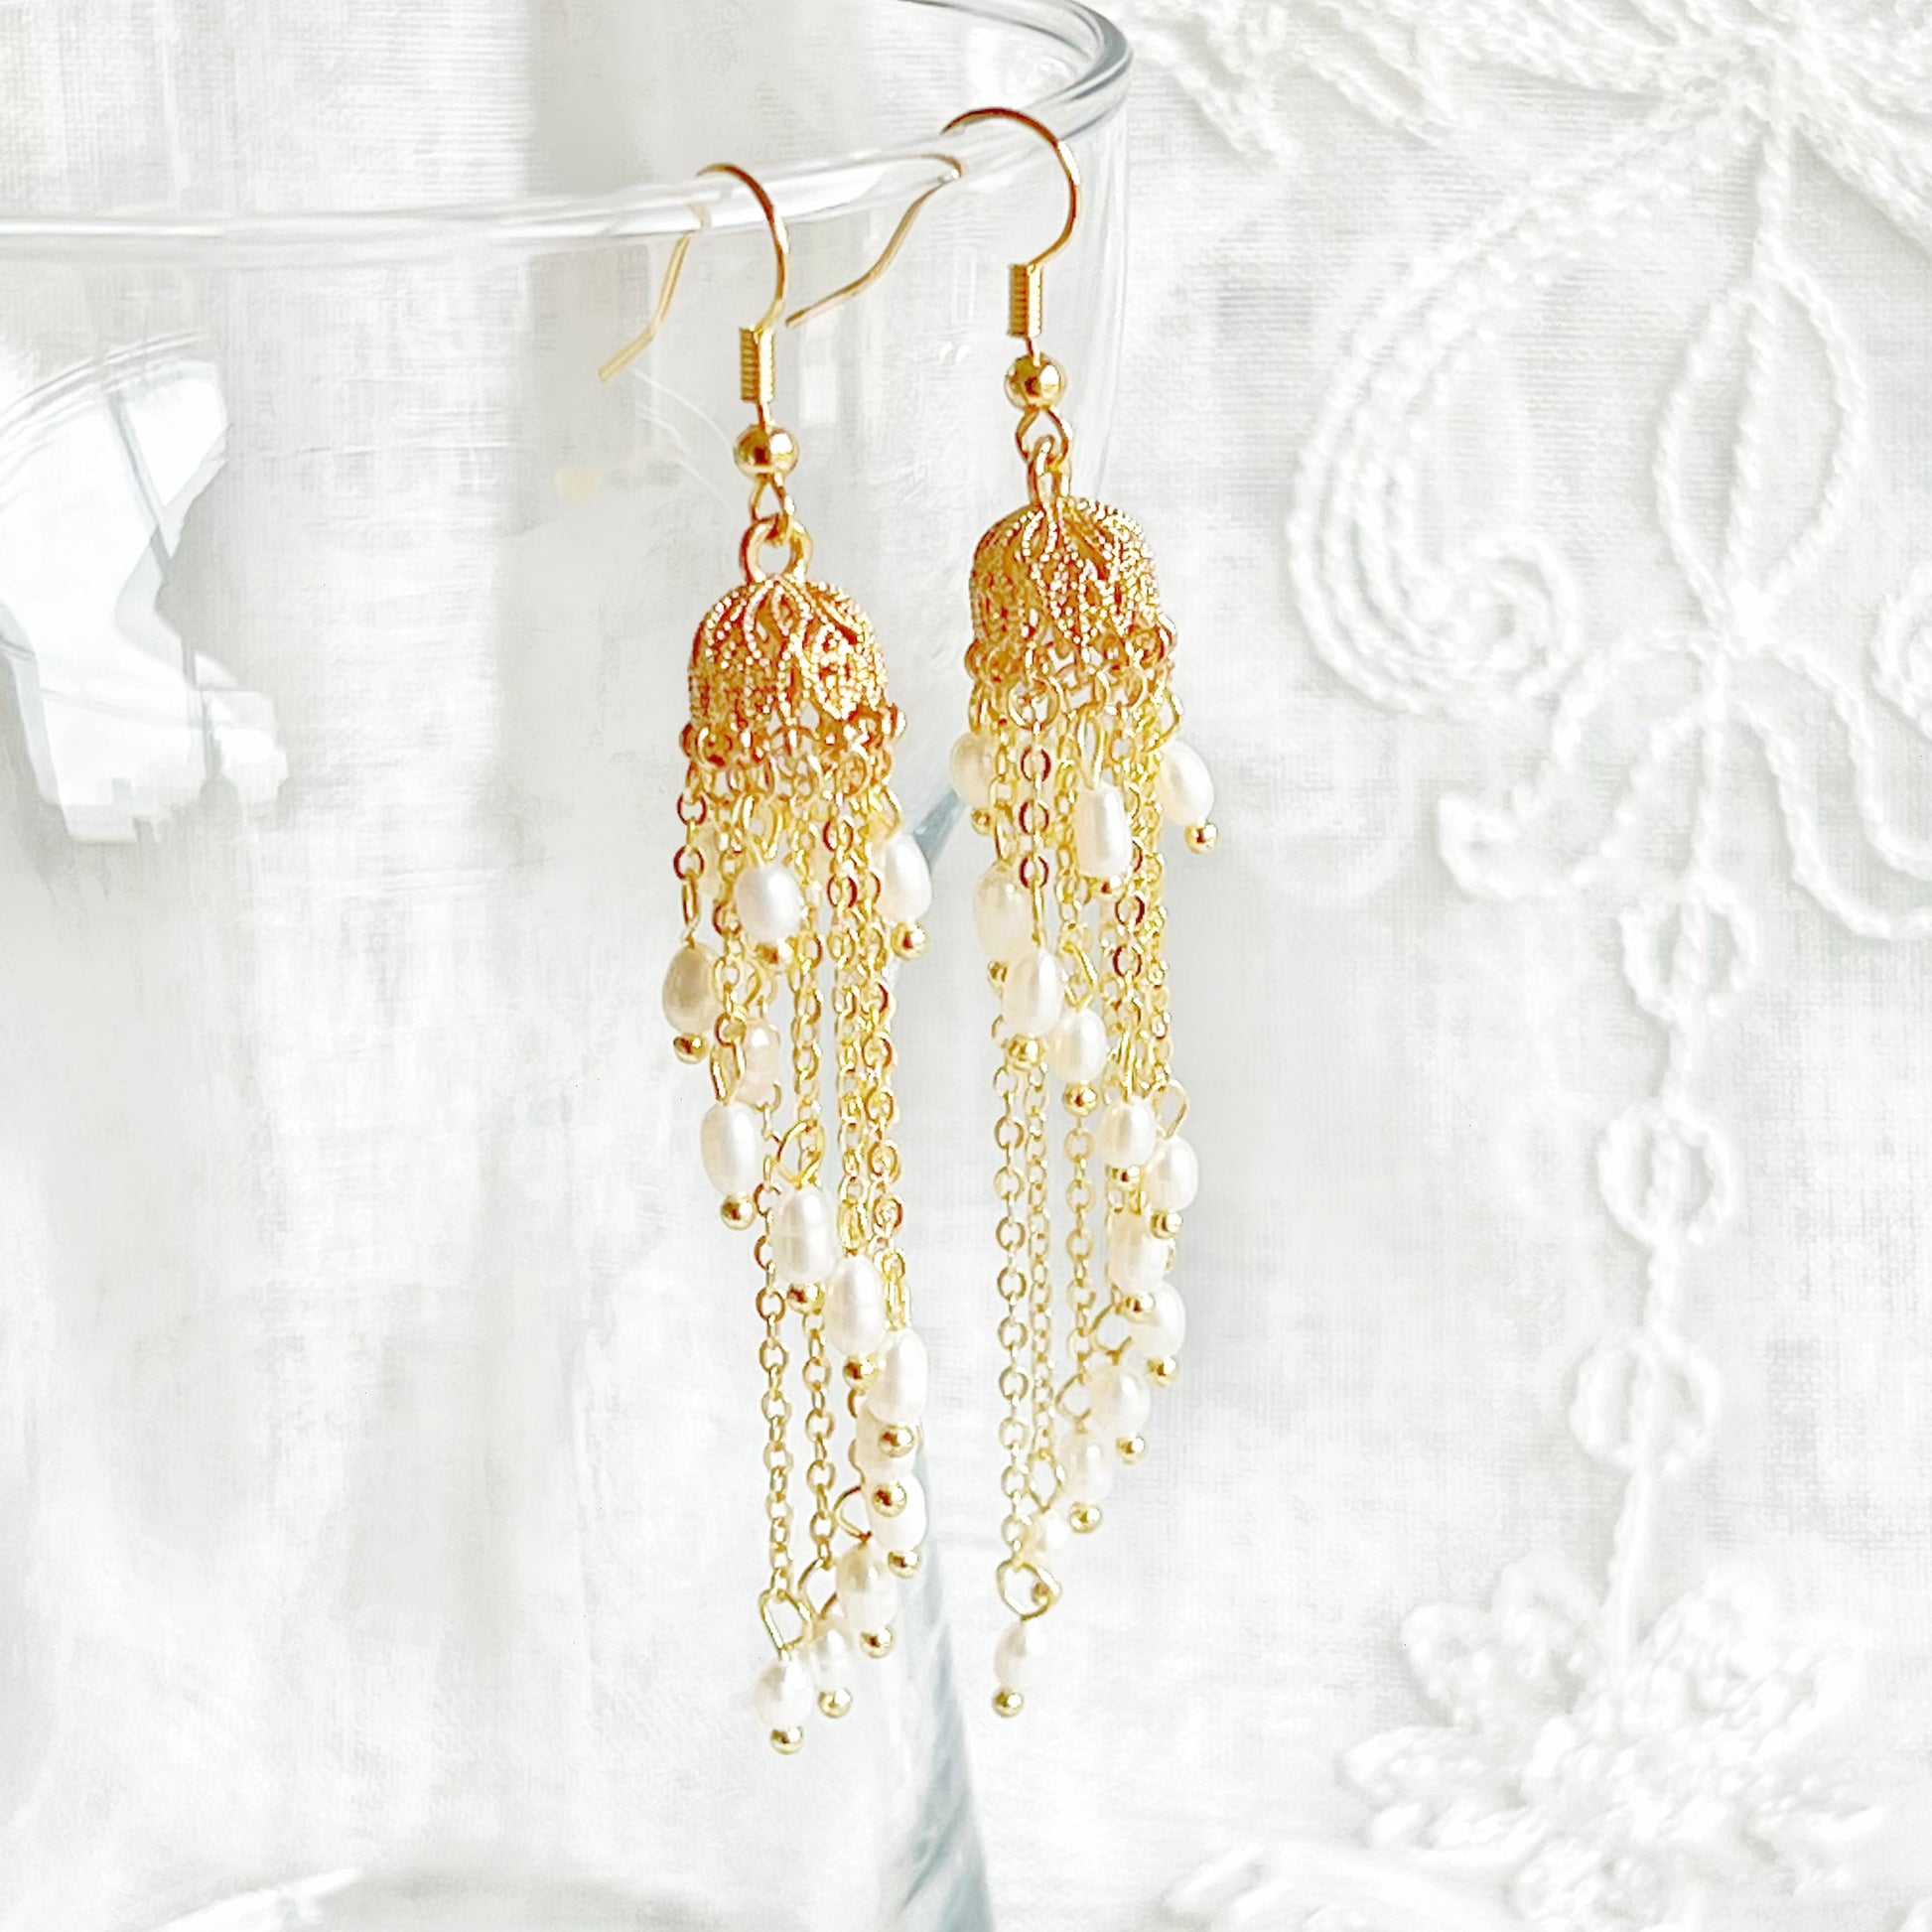 Gold Jhumka Earrings with Freshwater Pearls - Light Weight Drop Earrings-Ninaouity